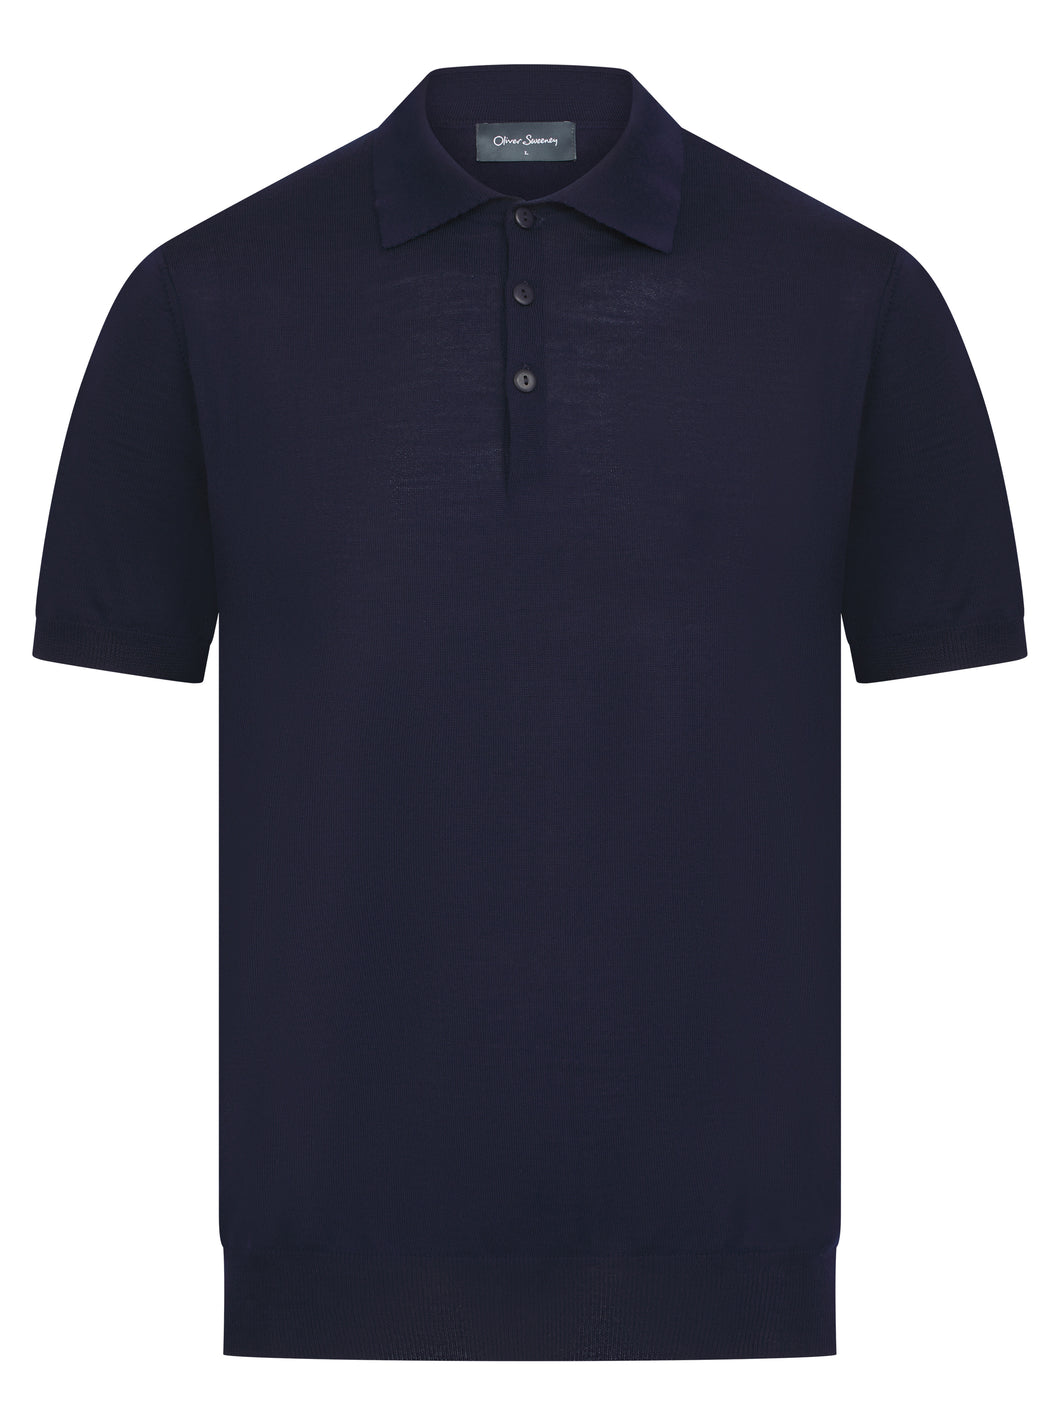 Oliver Sweeney Covehithe Polo Navy